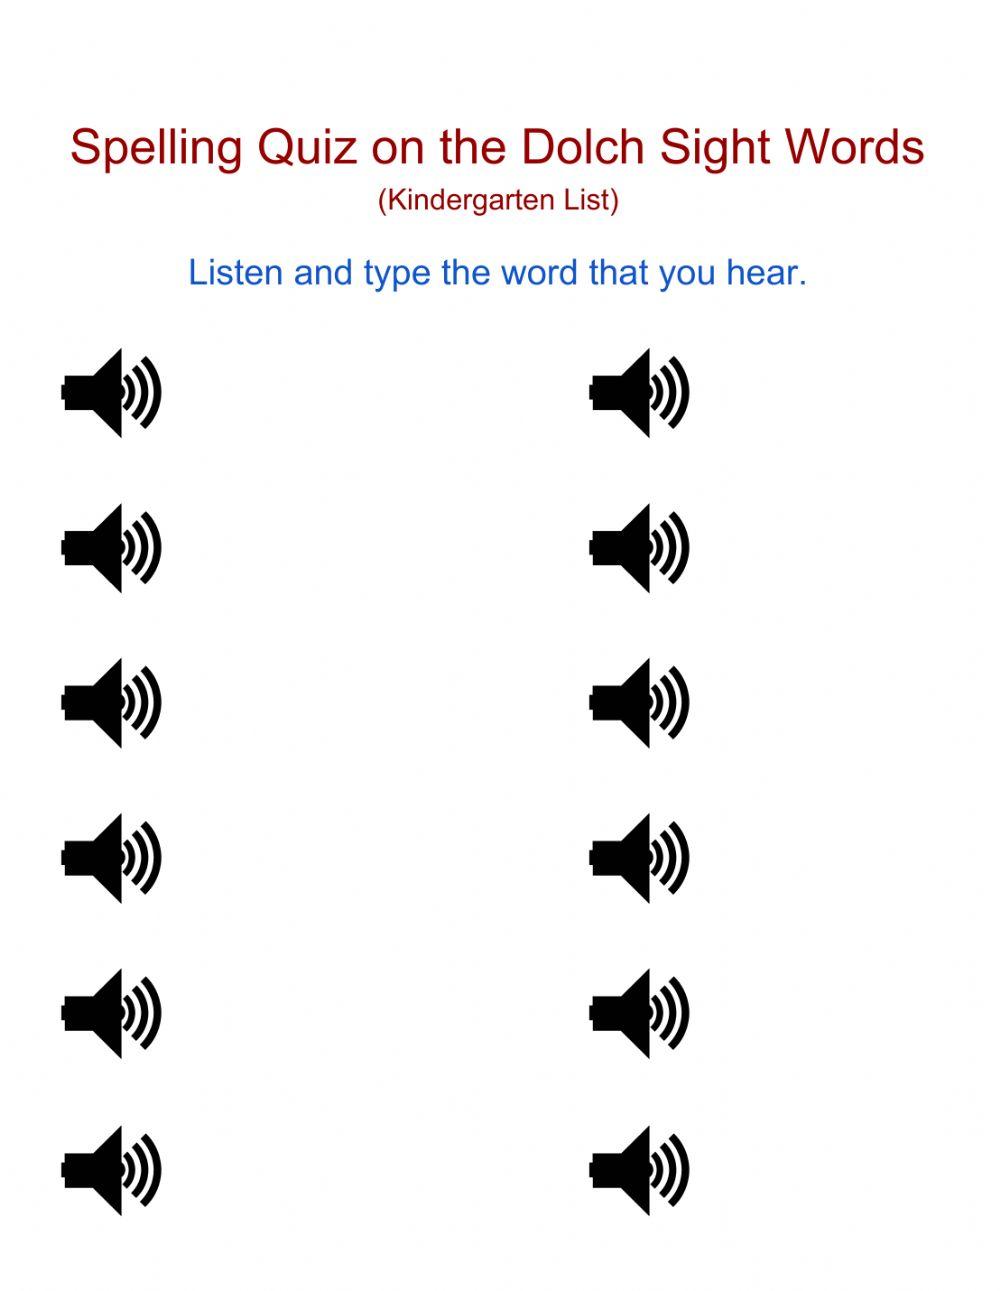 Spelling Test on Dolch Sight Words (KG)